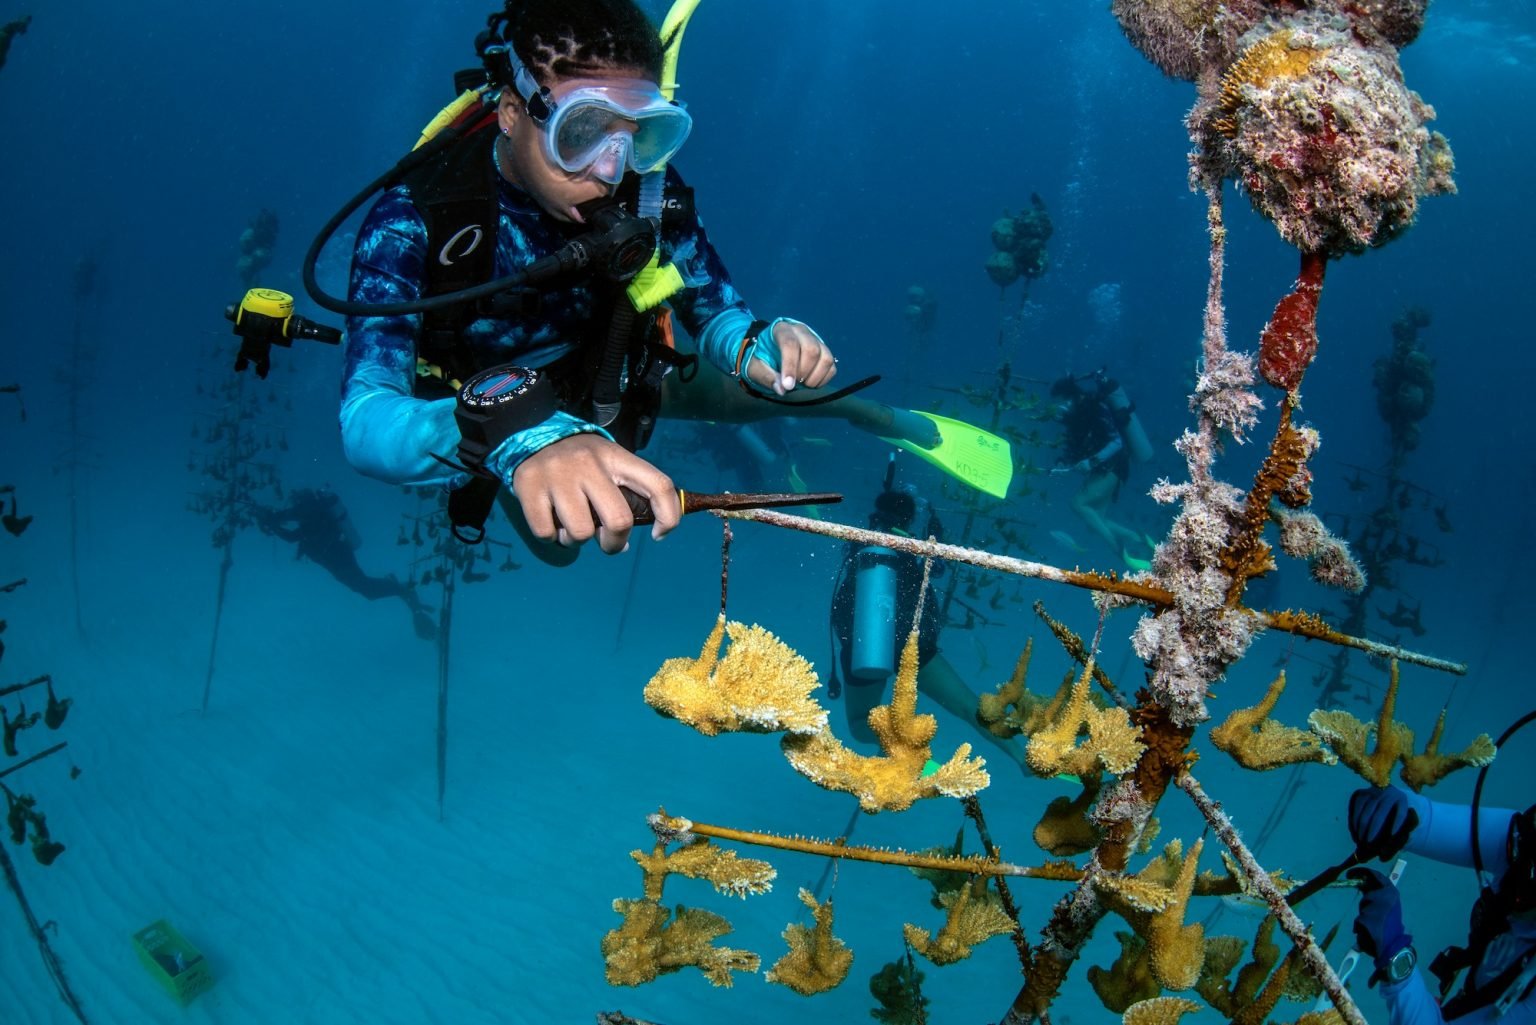 BGD Scholar Akai is cleaning coral branches